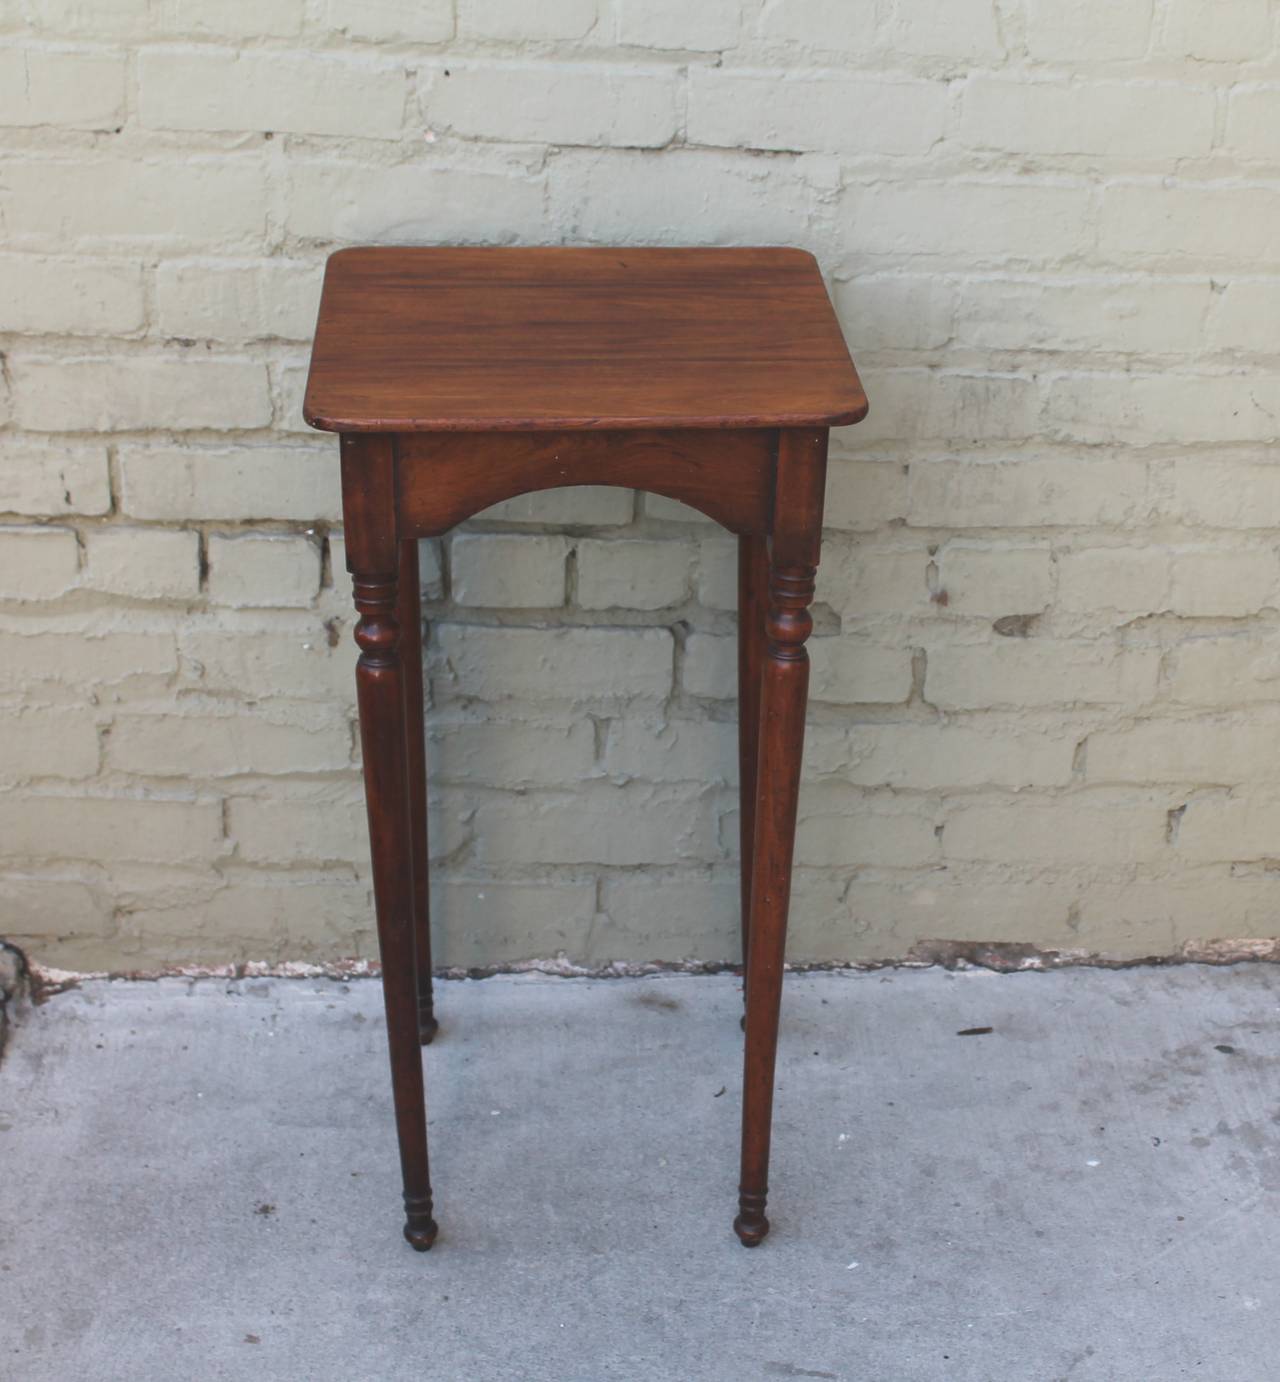 This finely made early turned leg stand has a wonderful original patina and is in very sturdy condition. The table has all of its original wood blocks underneath. It is simple yet amazing condition and surface.